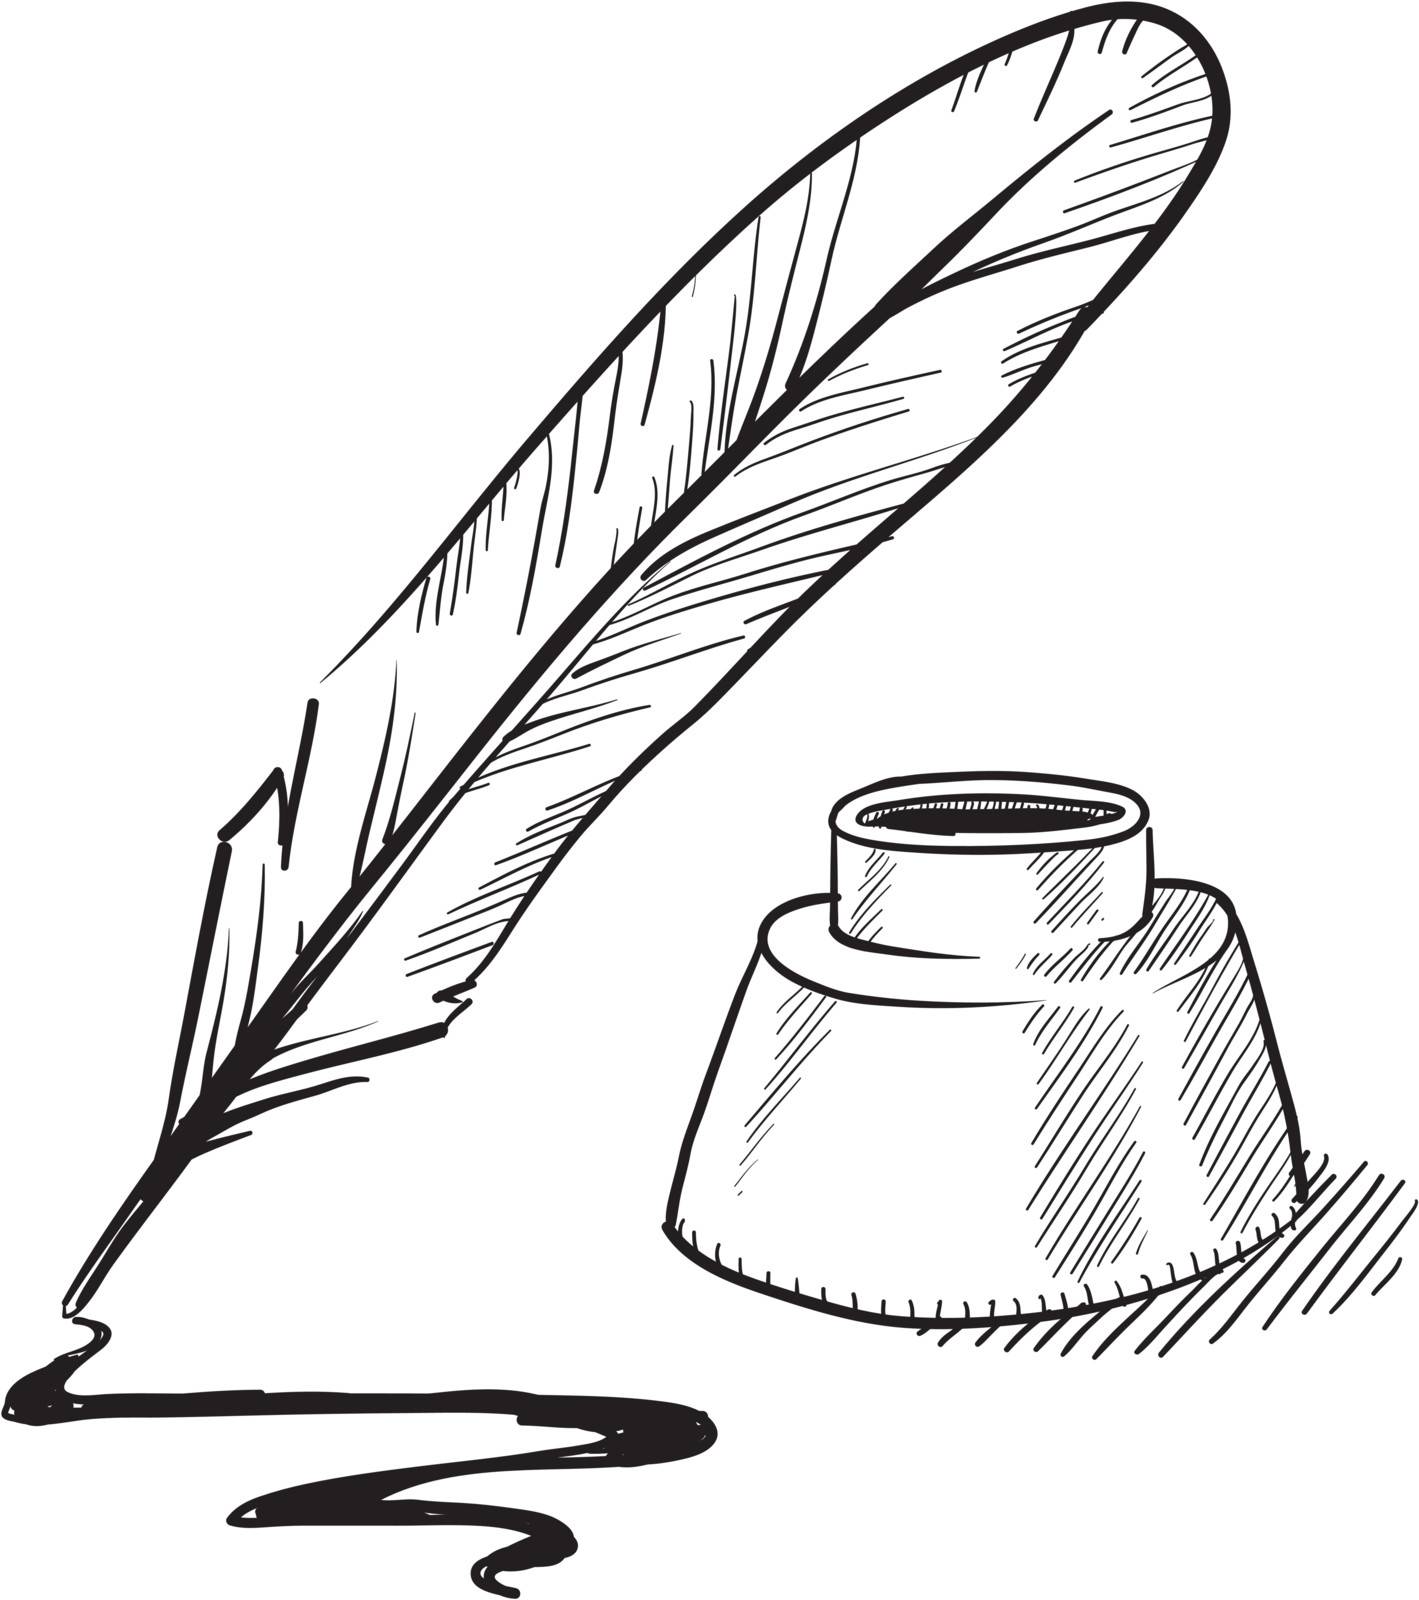 Quill pen and ink by lhfgraphics